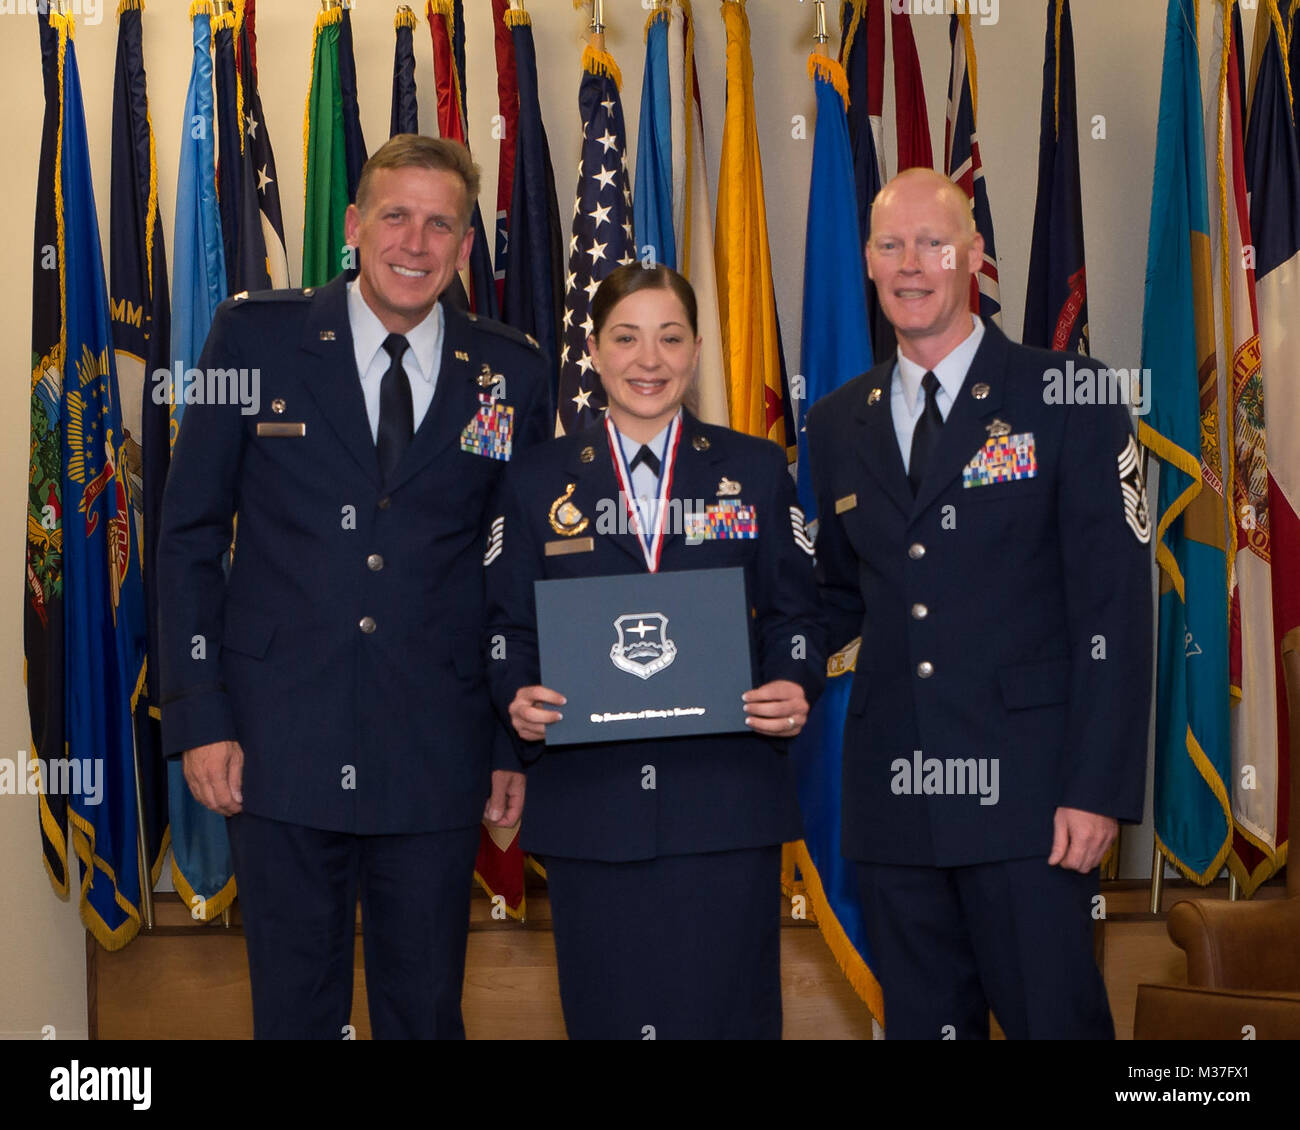 U.S. Air Force Airmen assigned to the 153rd Airlift Wing, Wyoming Air National Guard recognized for completing Community College of the Air Force degree, May 6, 2017 at the Trails End club in Cheyenne, Wyoming. More that 60 Airmen assigned to the wing received their Associate of Science degree in their Air Force specialty. (U.S. Air National Guard photo by Senior Master Sgt. Charles Delano/released) 170506-Z-PA223-3014 by wyoguard Stock Photo